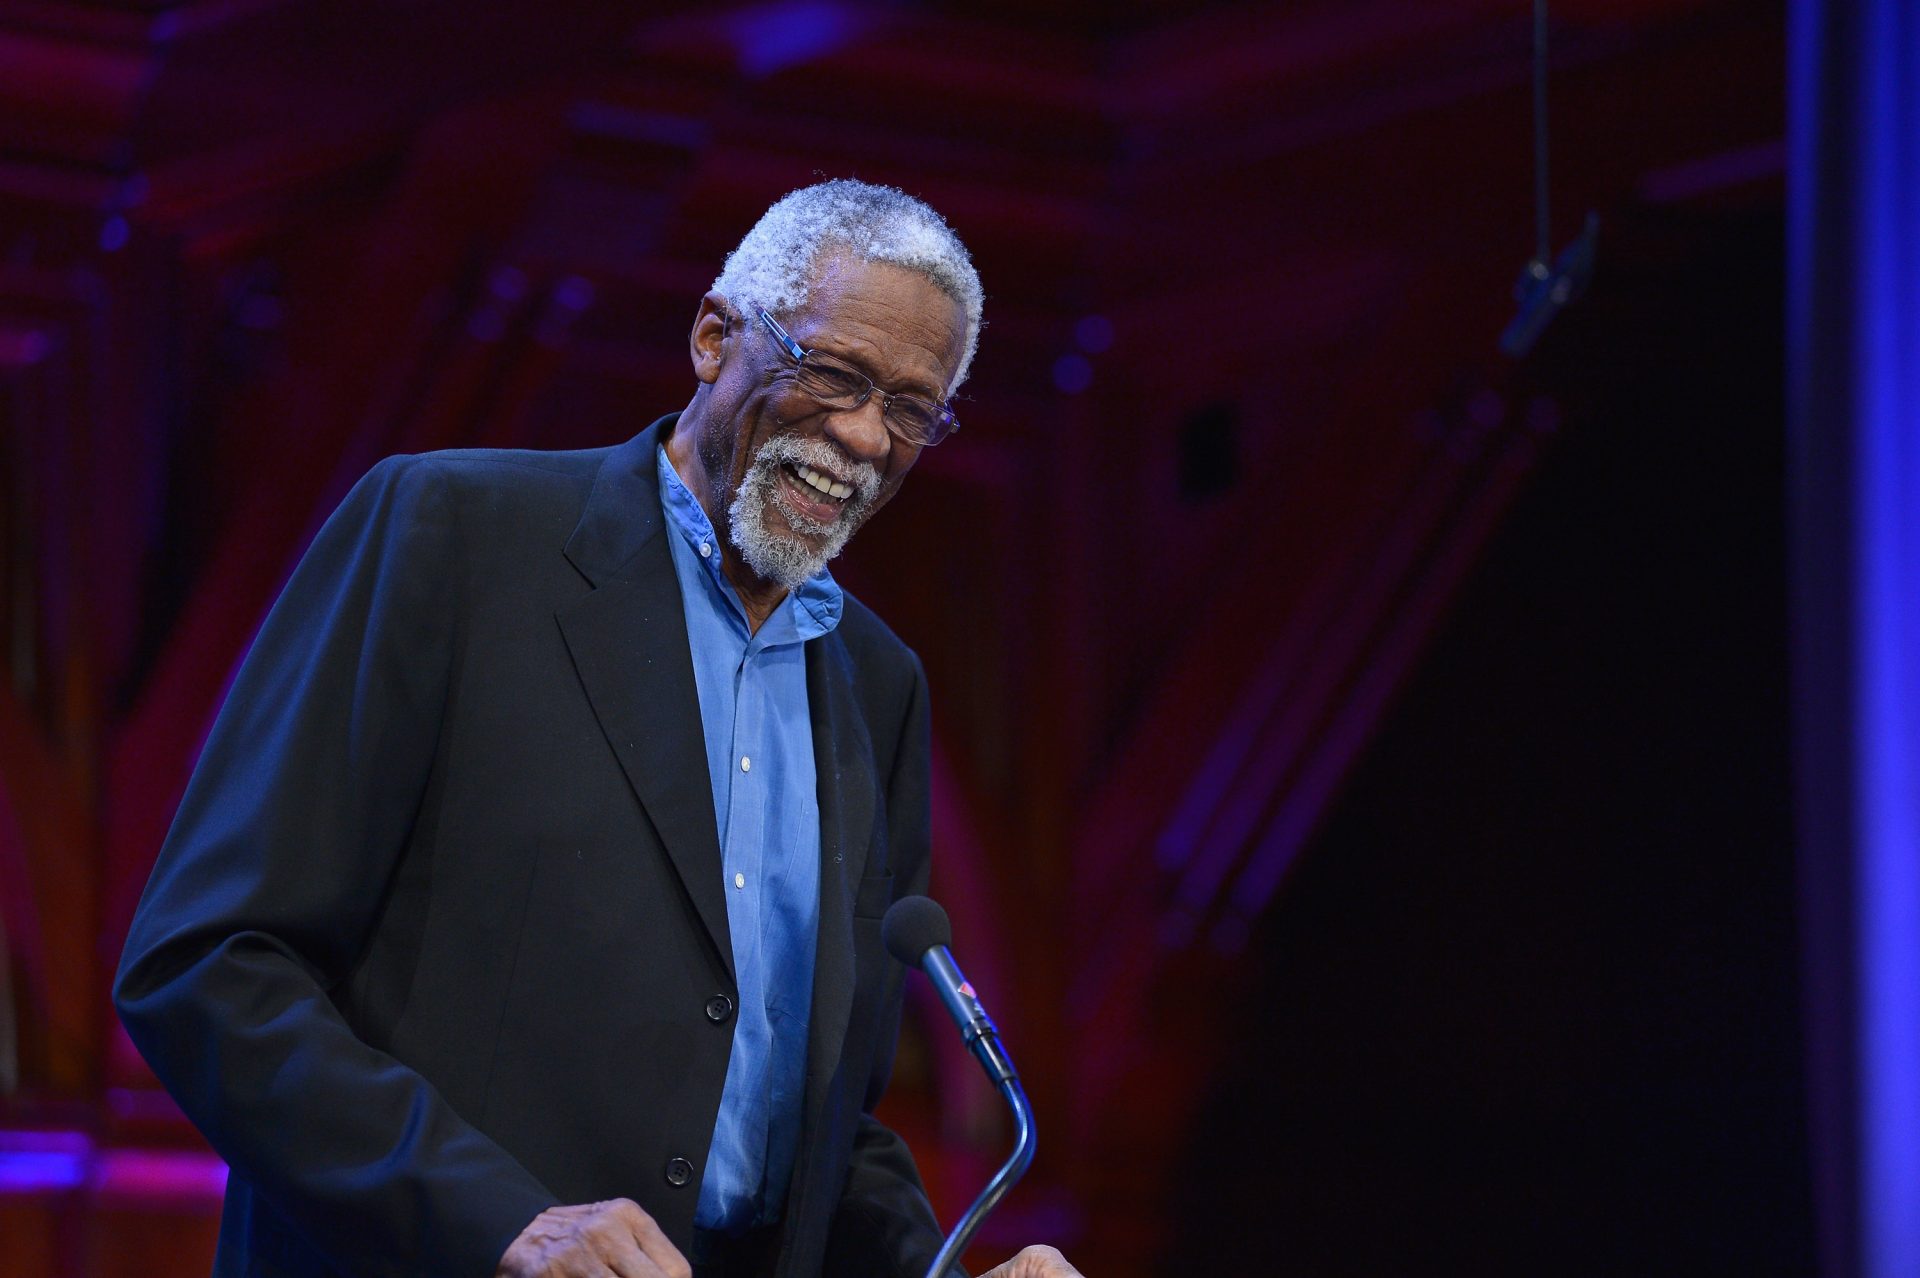 The NBA is retiring No. 6 jerseys league-wide in honor of Bill Russell